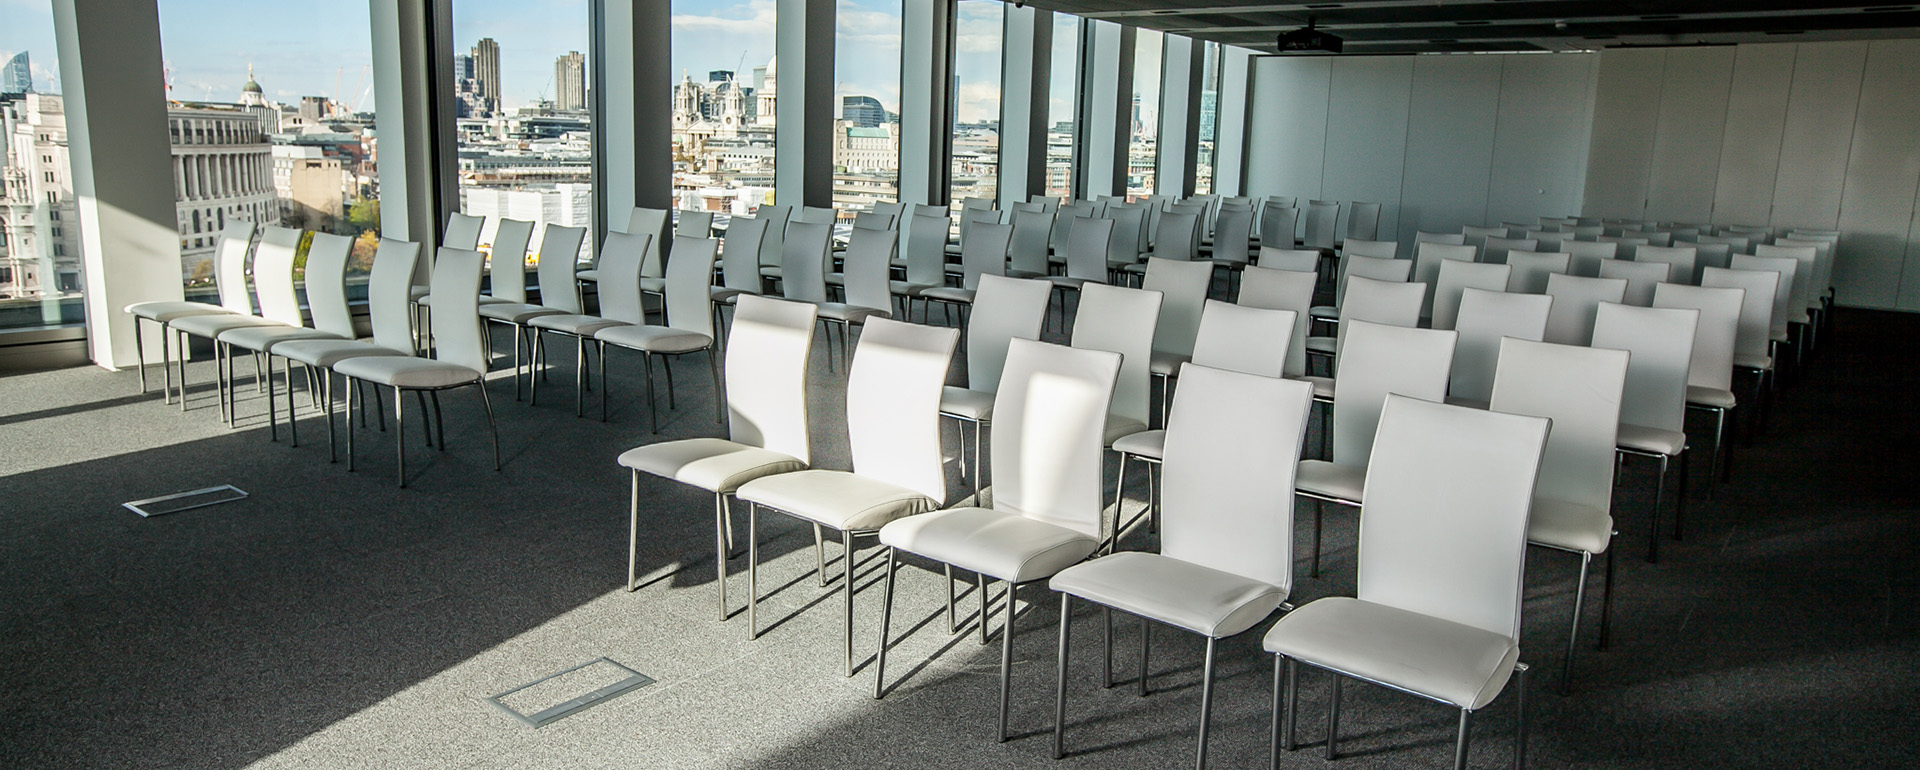 Chairs set up for a conference in Level 12 Room